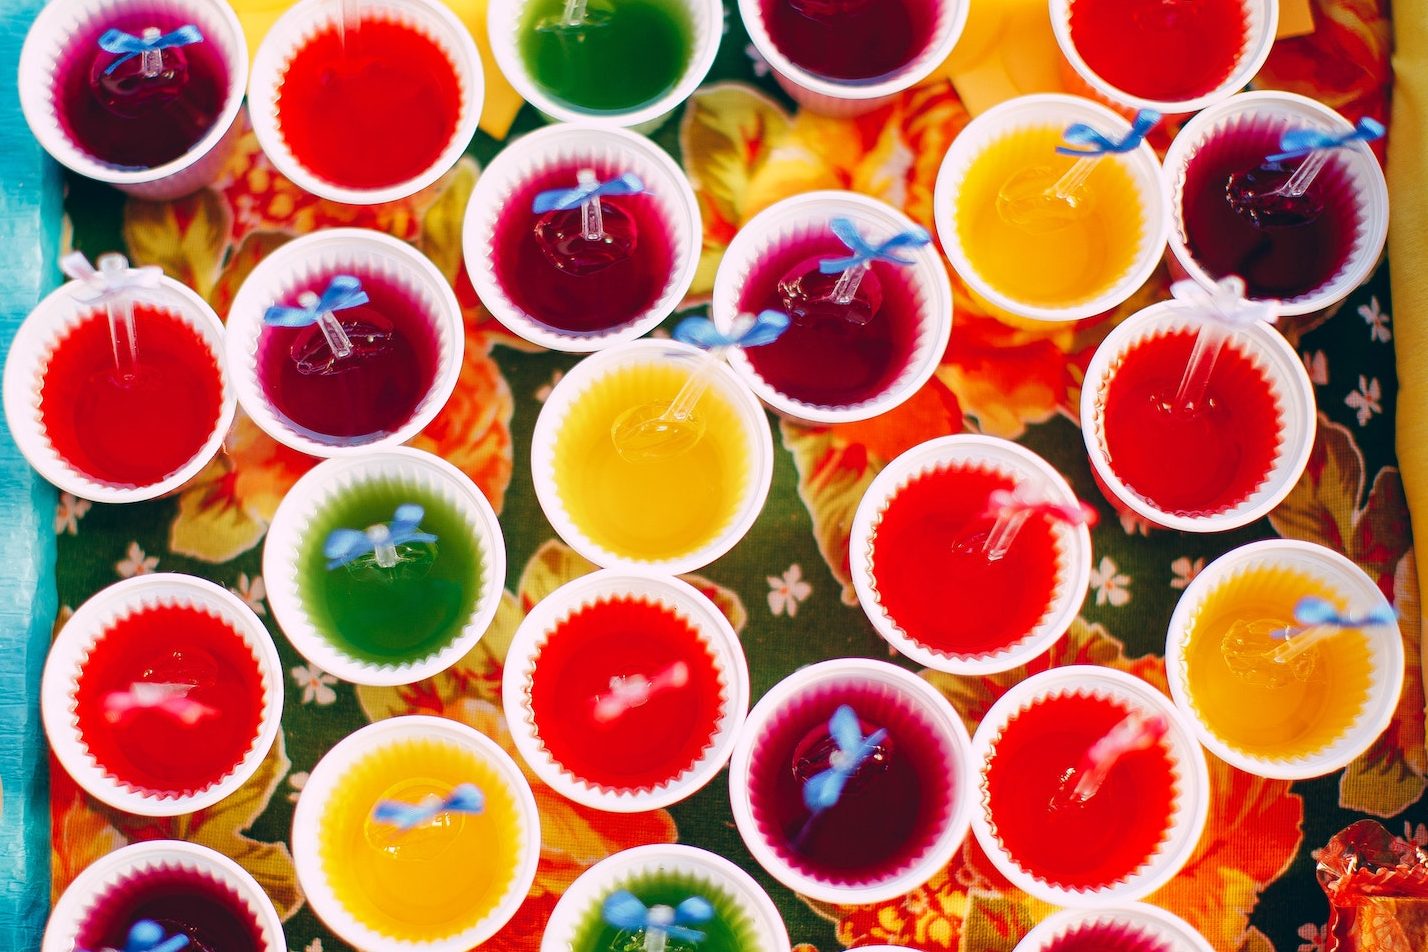 Colorful jello shots in white ceramic cups on a floral table cloth.